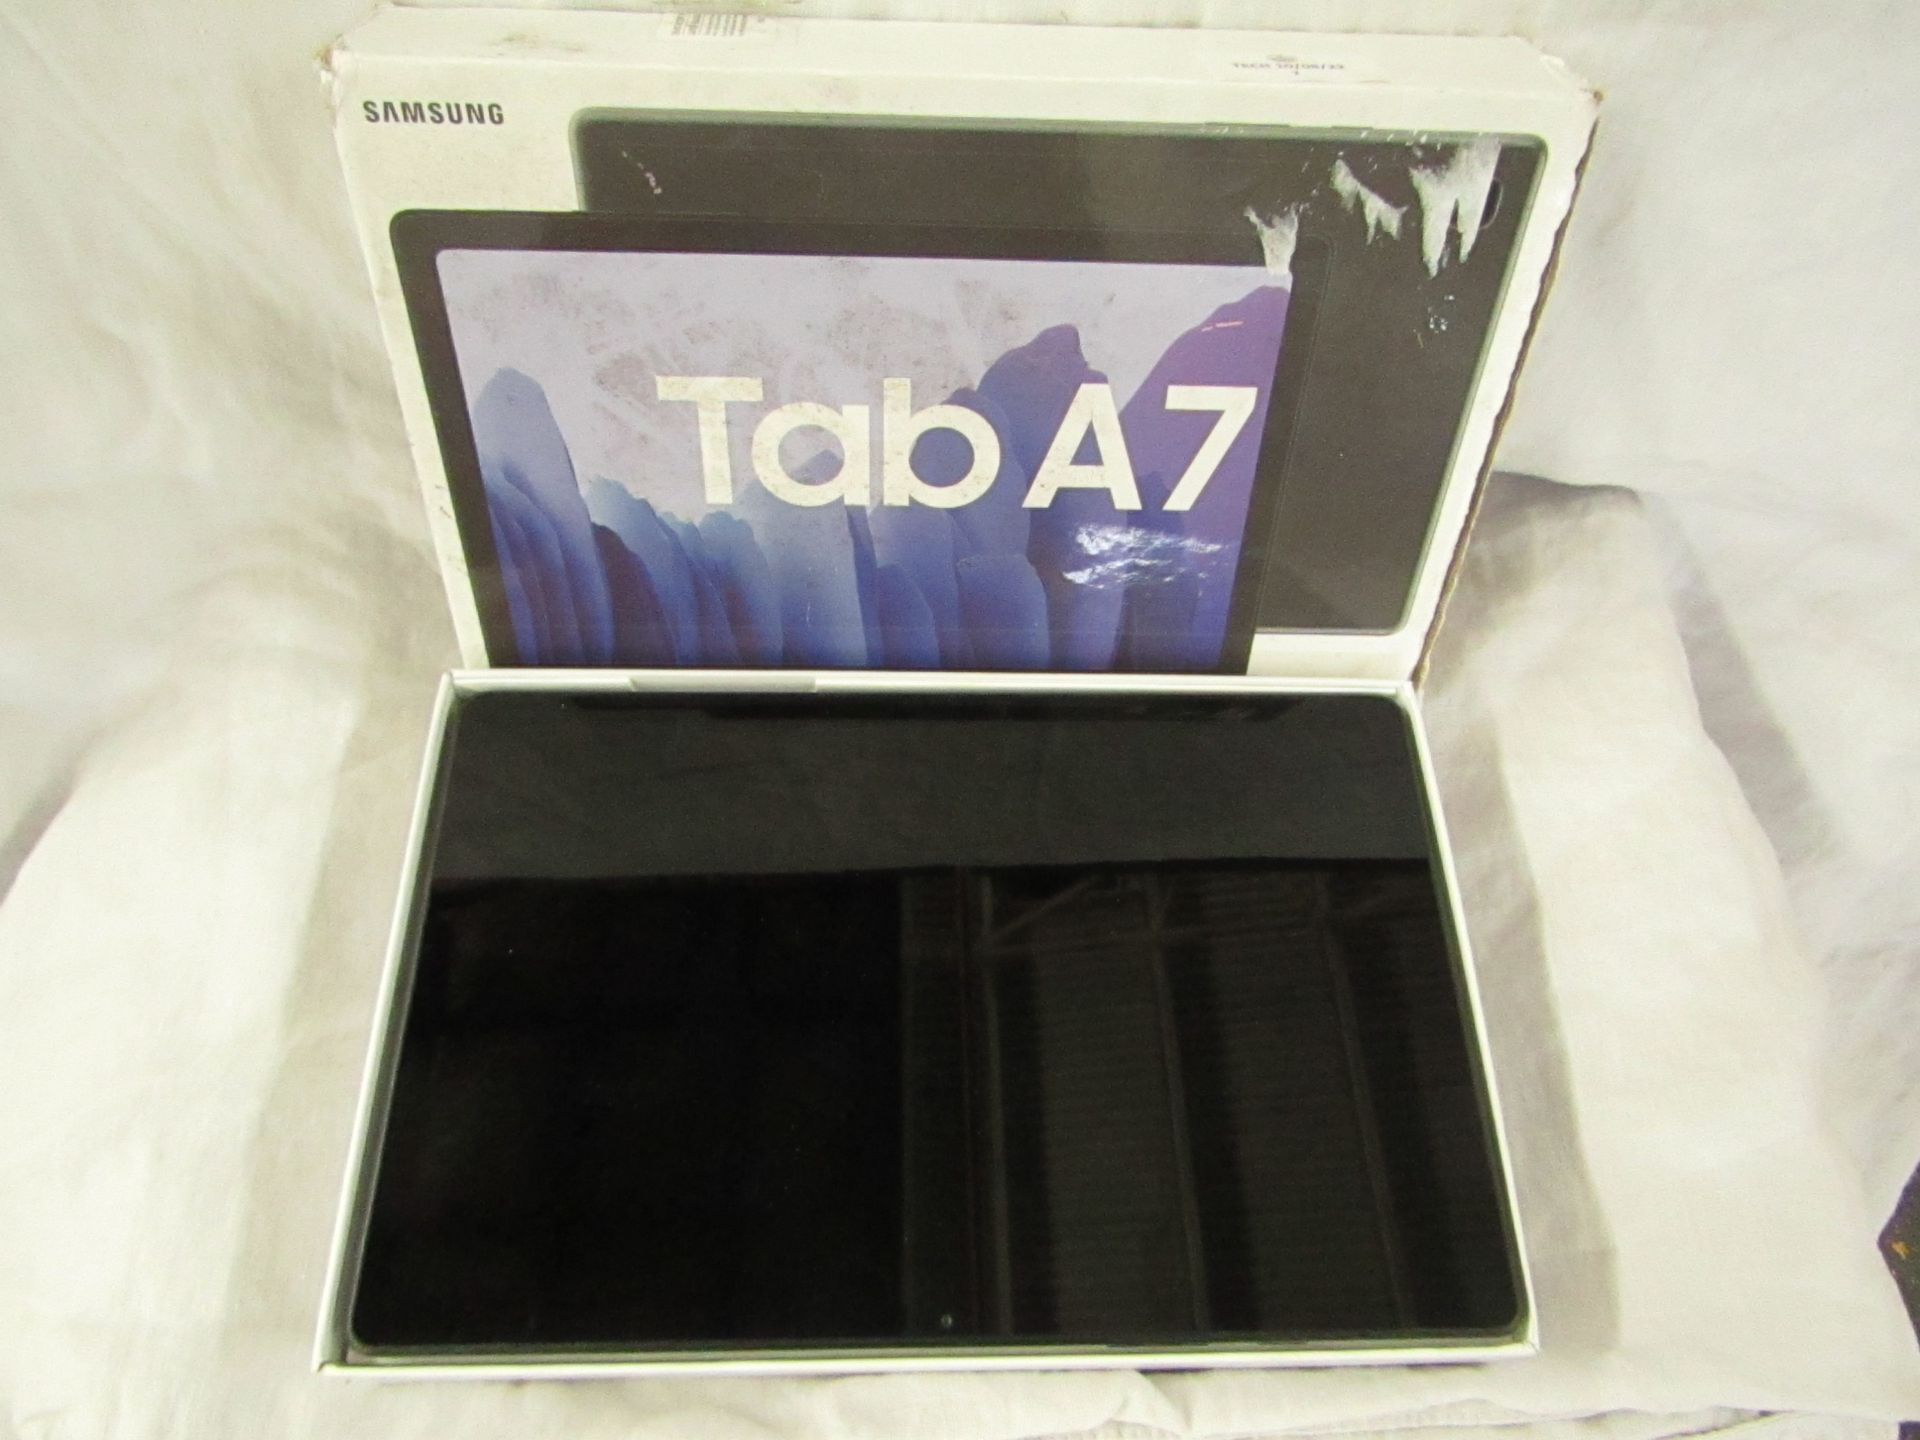 Samsung Galaxy Tab A, Dark Grey 32GB. Tested Working, Missing The Charger Lead But Has The Plug,